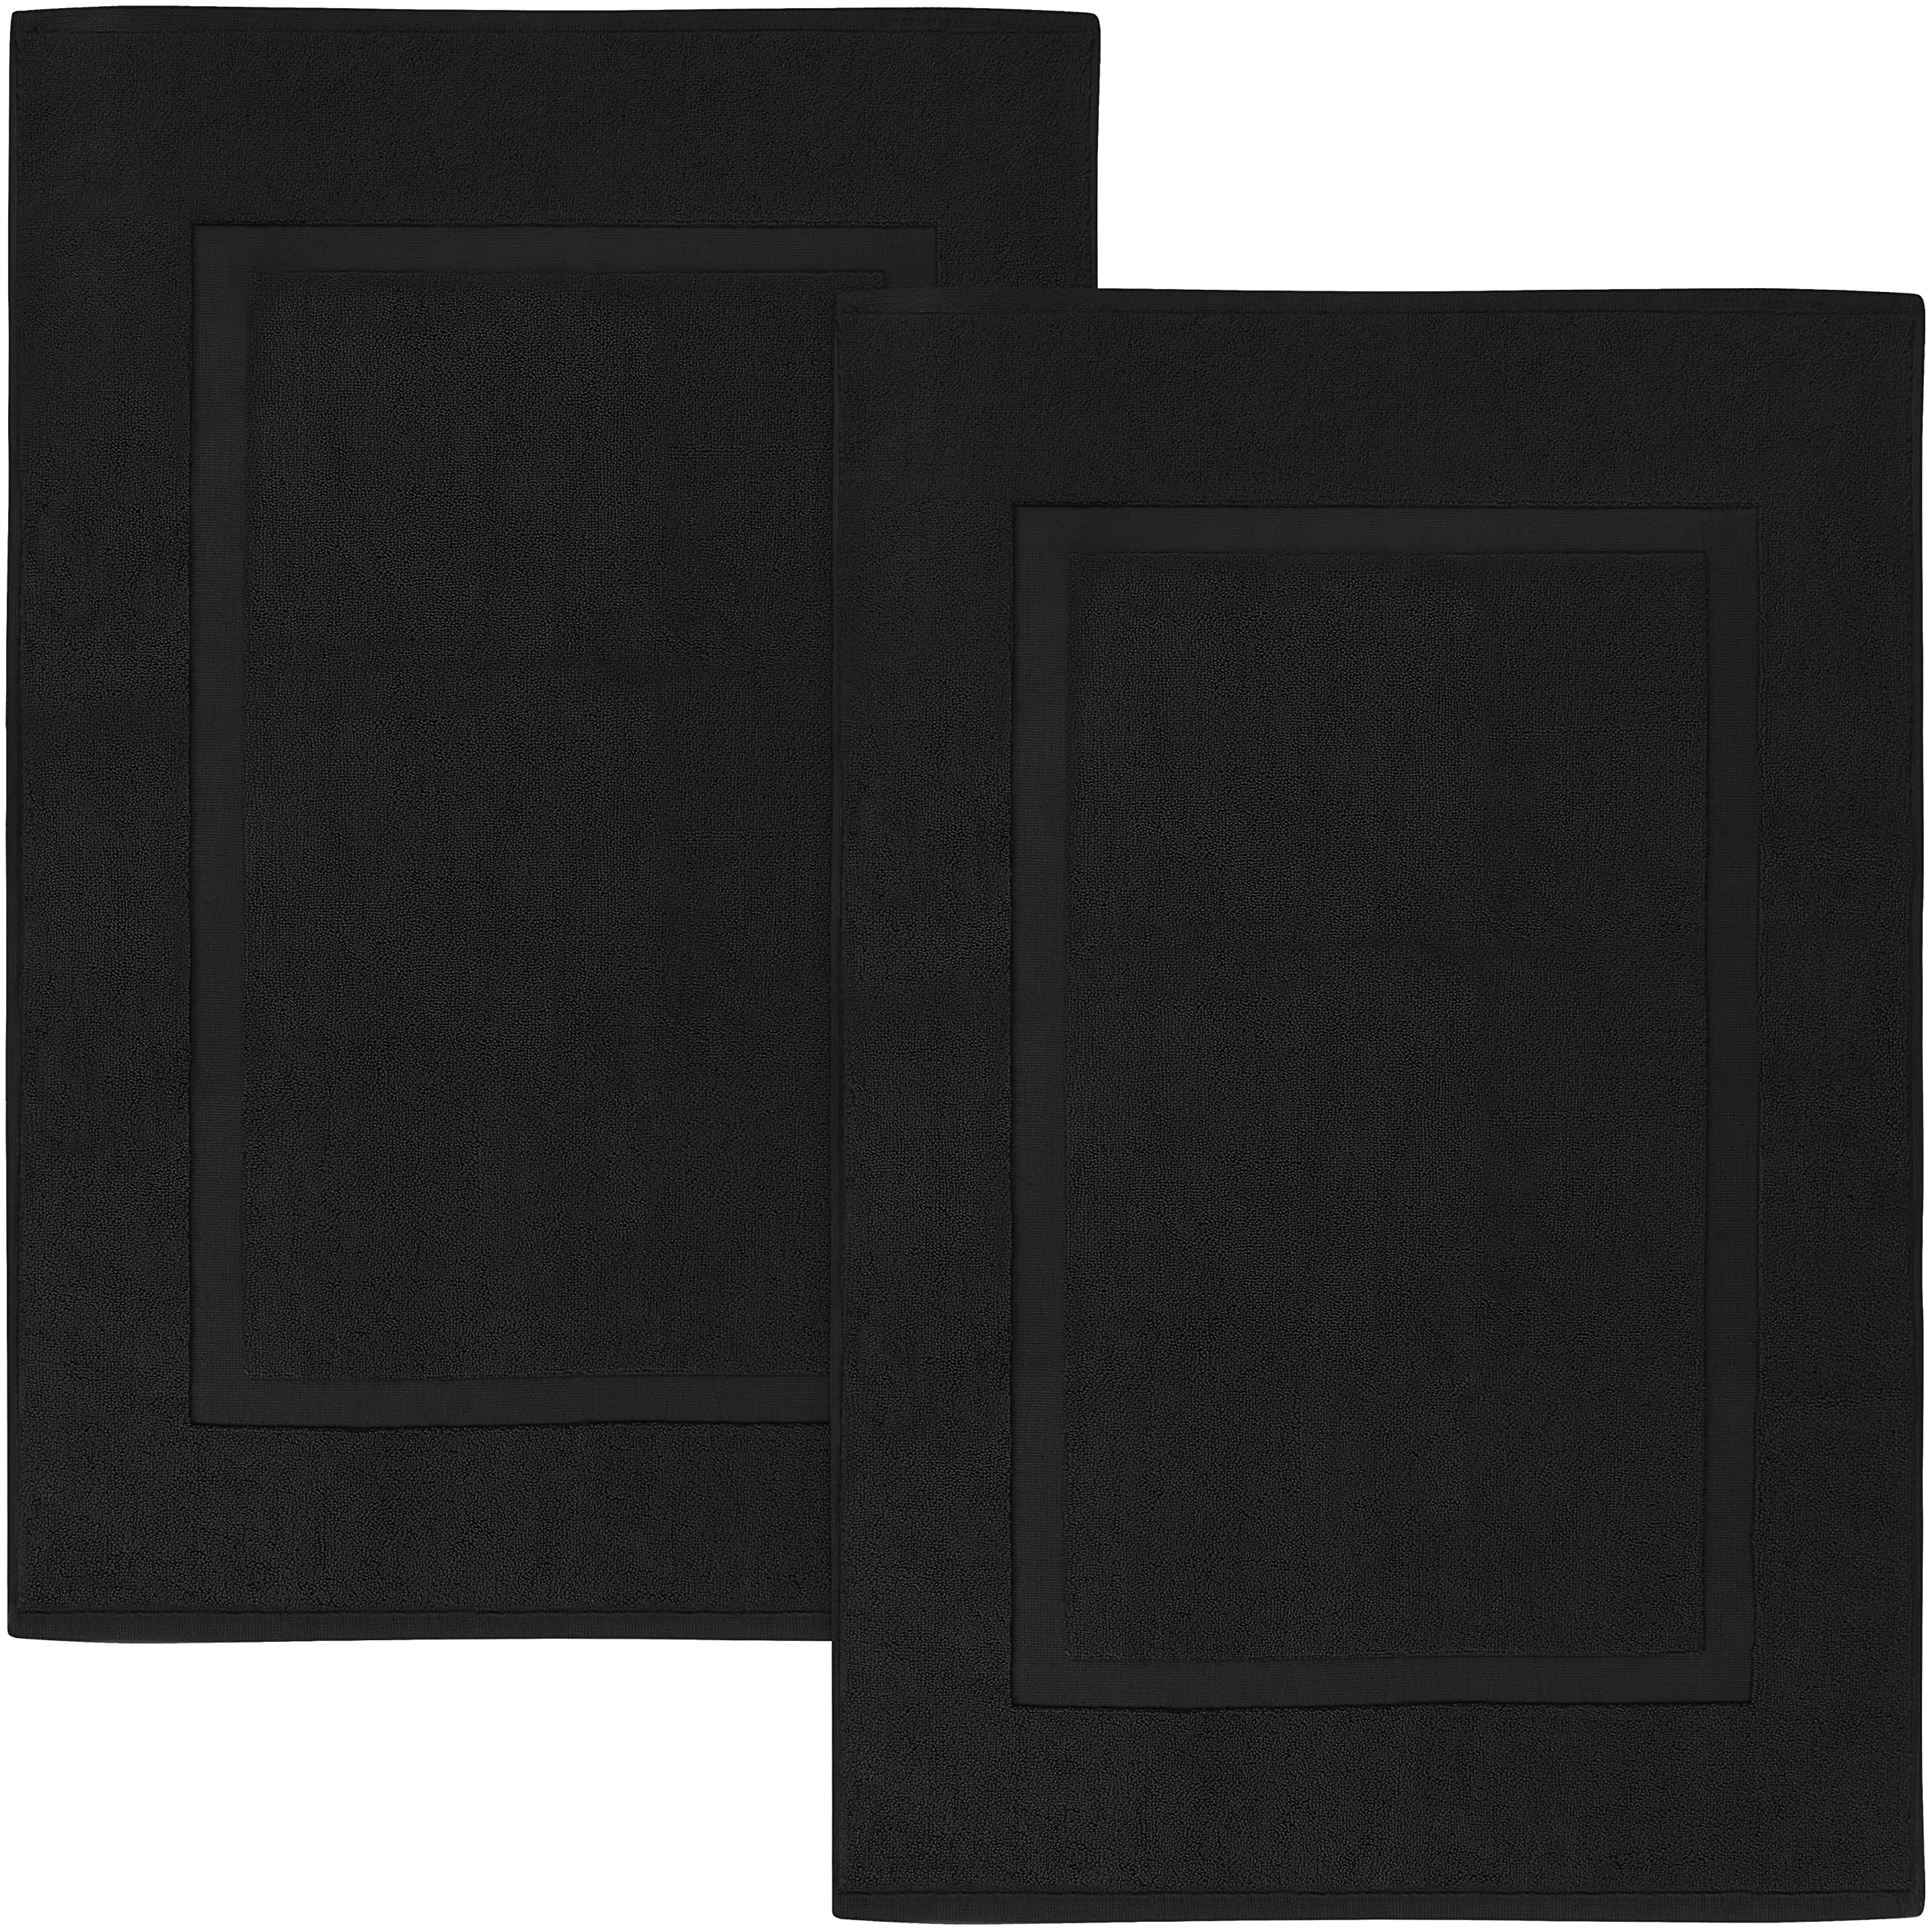 Utopia Towels Cotton Banded Bath Mats, Black, Not a Bathroom Rug, 21 x 34  Inches, 100% Ring Spun Cotton - Highly Absorbent and Machine Washable Shower  Bathroom Floor Mat (Pack of 2) 2 Pack Black